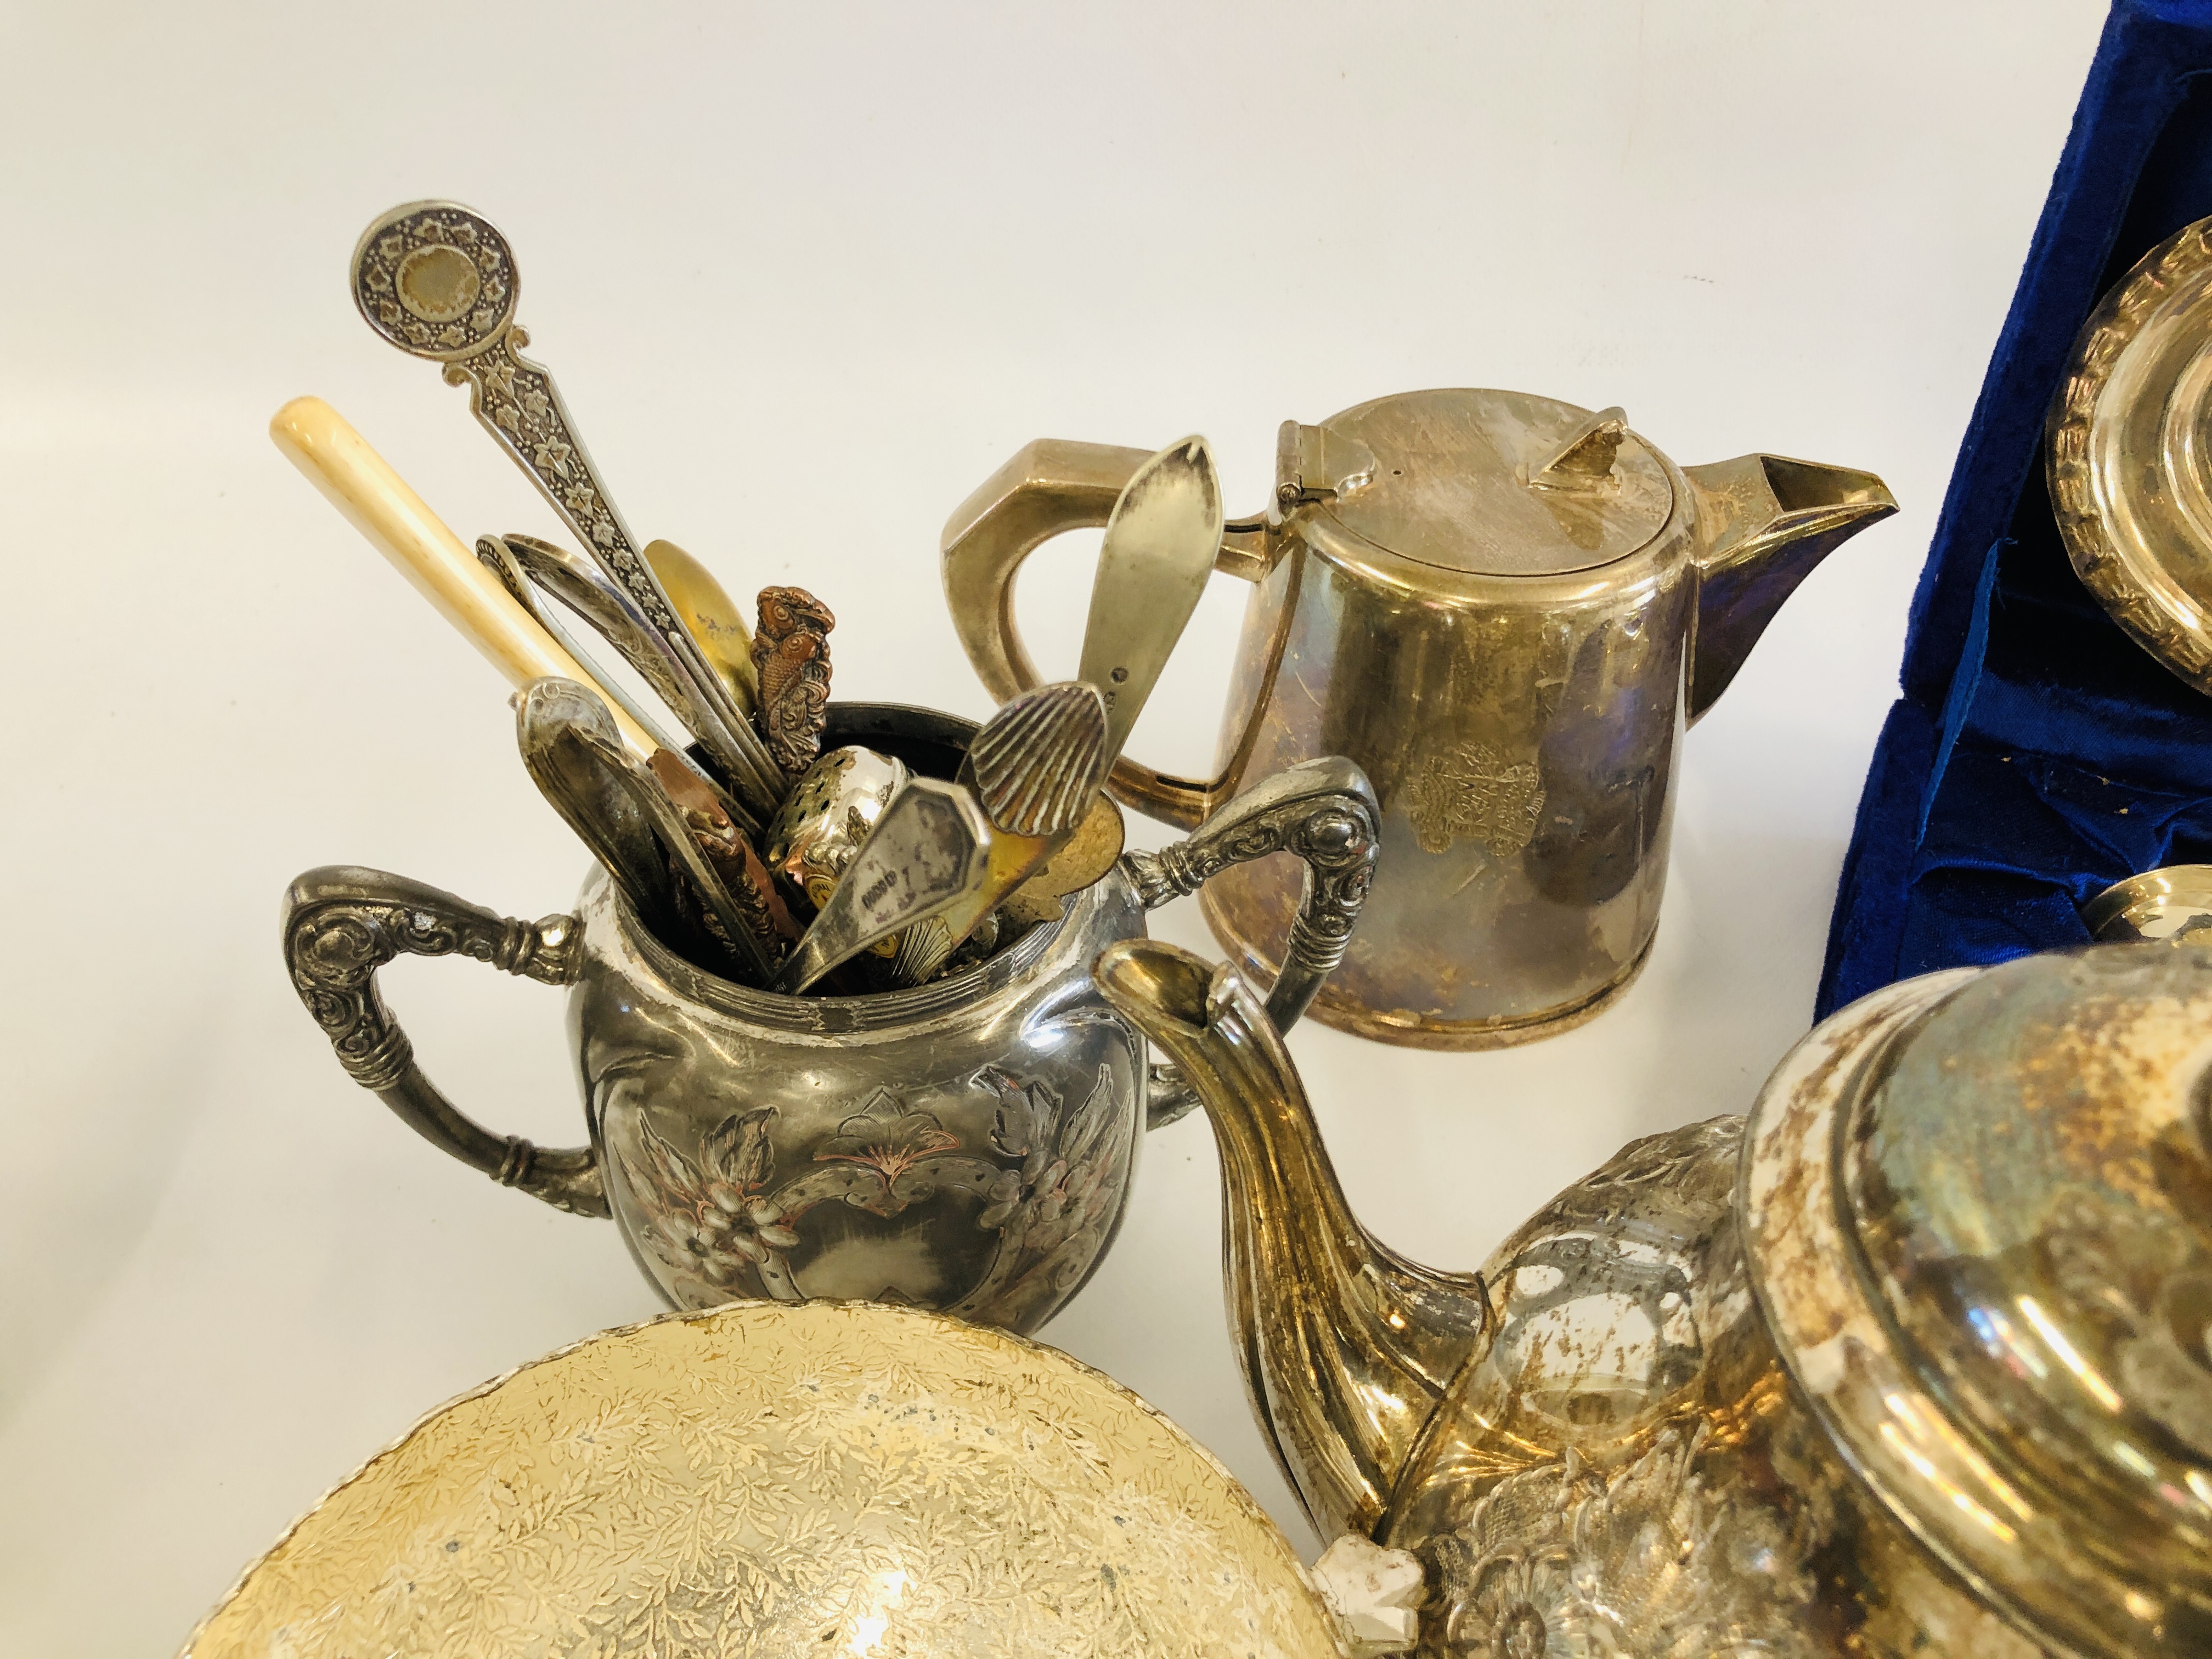 A BOX OF ASSORTED PLATED WARES ALONG WITH A BOX OF PEWTER WARES TO INCLUDE MINIATURE EXAMPLES. - Image 6 of 11